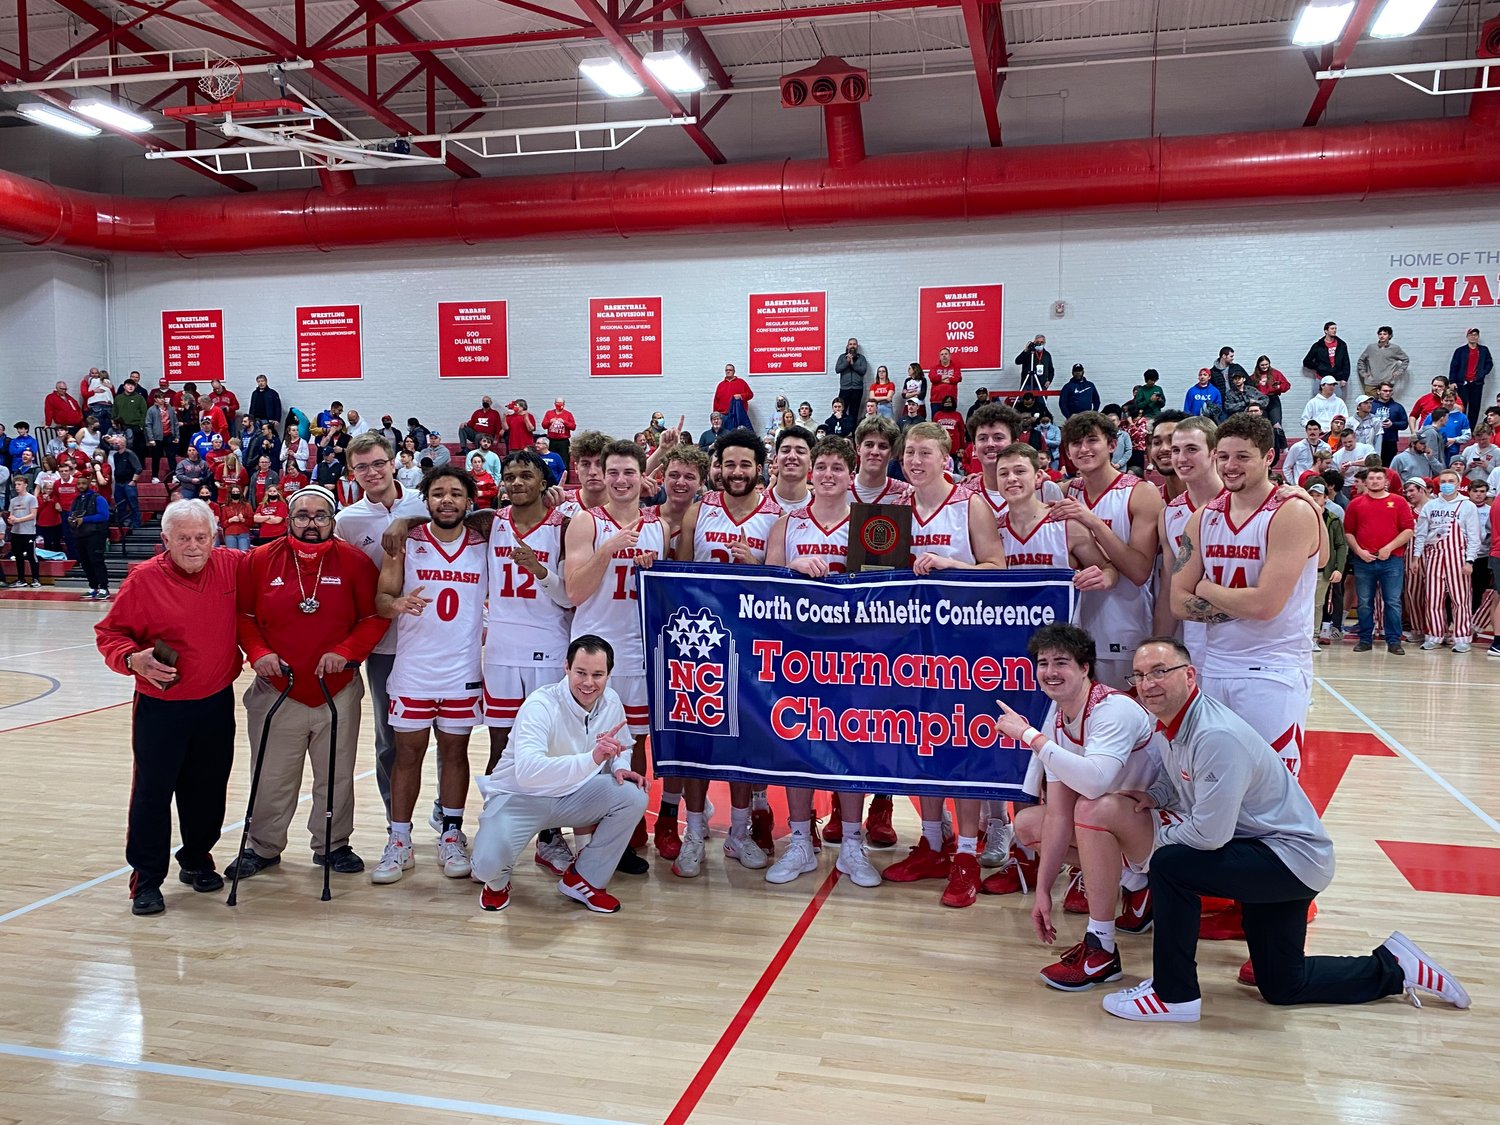 Wabash clinched their first NCAC Title in school history with a thrilling 85-84 win over Wooster. The Little 
Giants will be heading to the NCAA D3 Tournament for the first time since 1998.